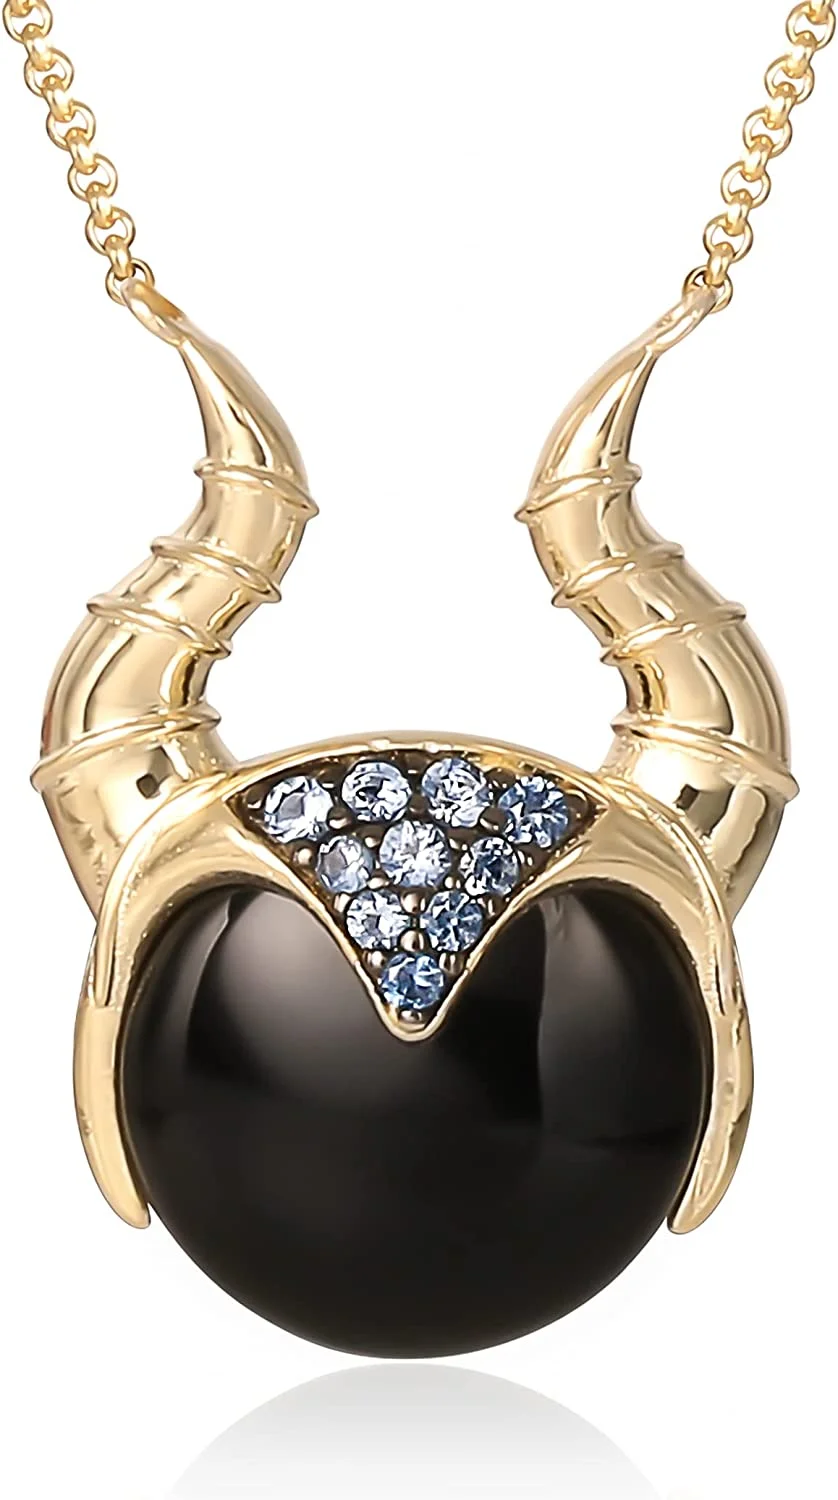 Disney Jewelry Villains Necklace - Maleficent, Ursula, Evil Queen Designs, Cubic Zirconia, Gold Over Sterling Silver